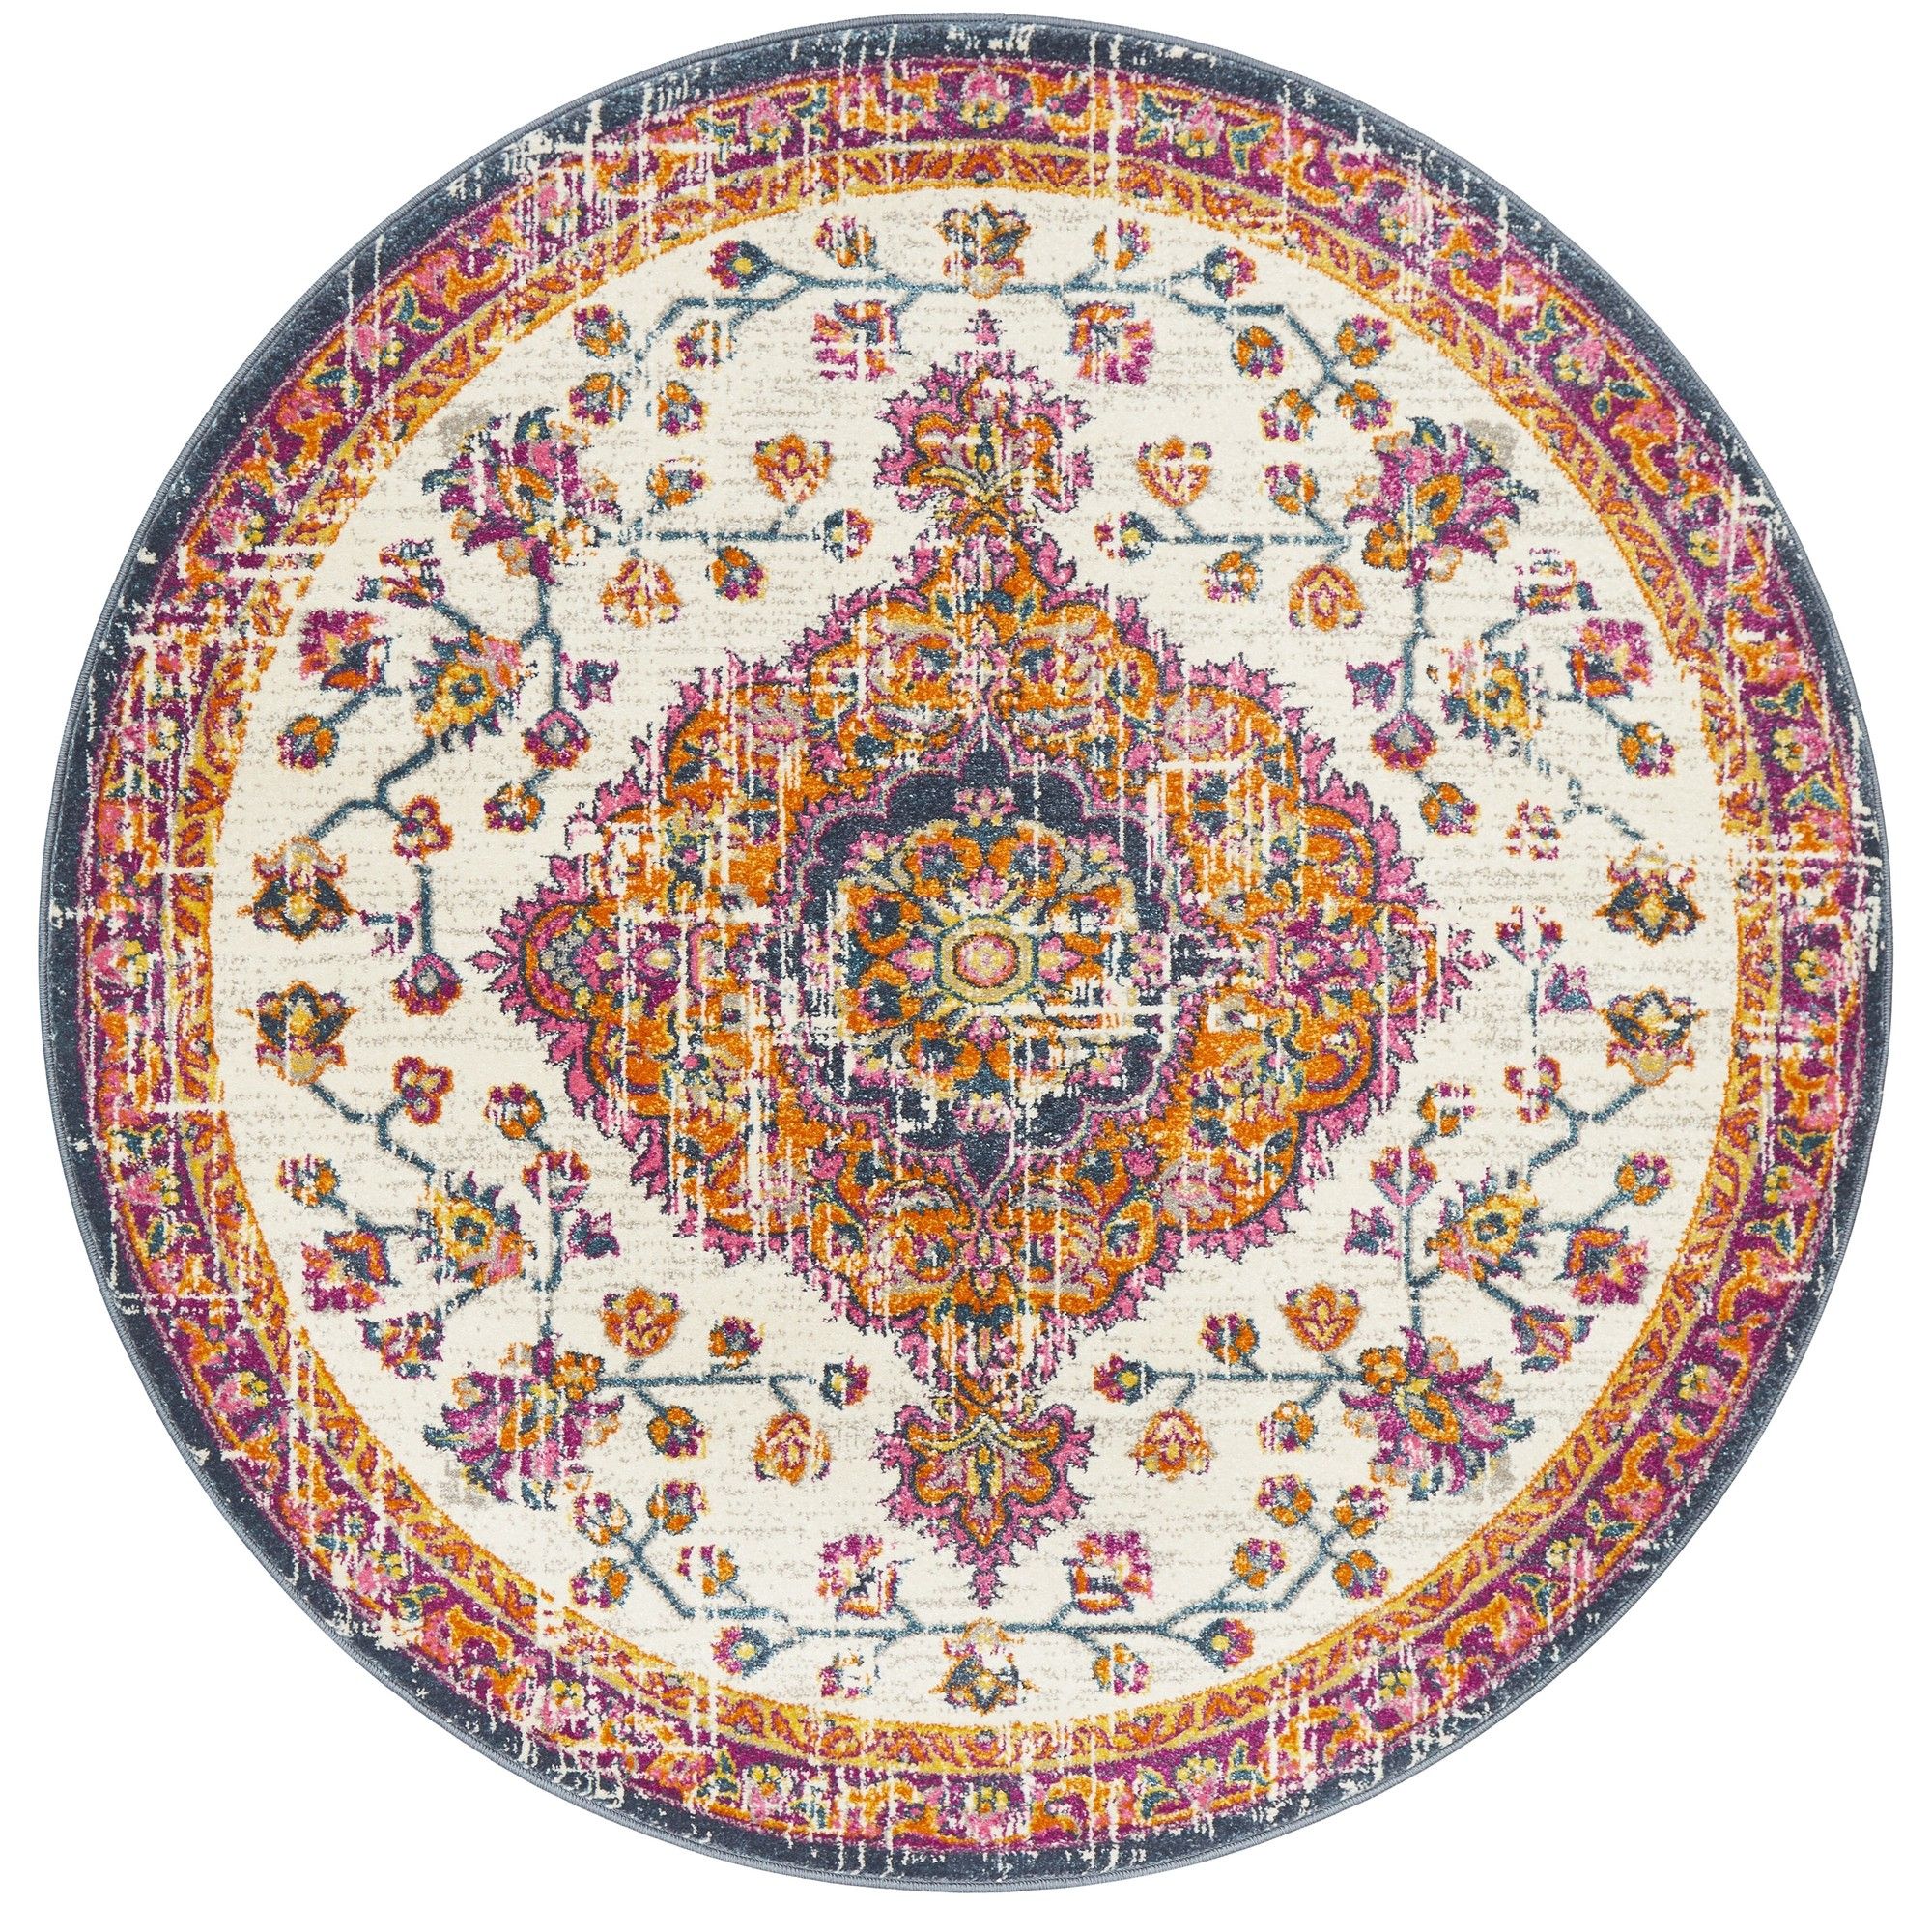 Network Ivory & Rust Blossom Vintage Look Round Rug | Temple & Webster For Ivory Blossom Round Rugs (View 8 of 15)